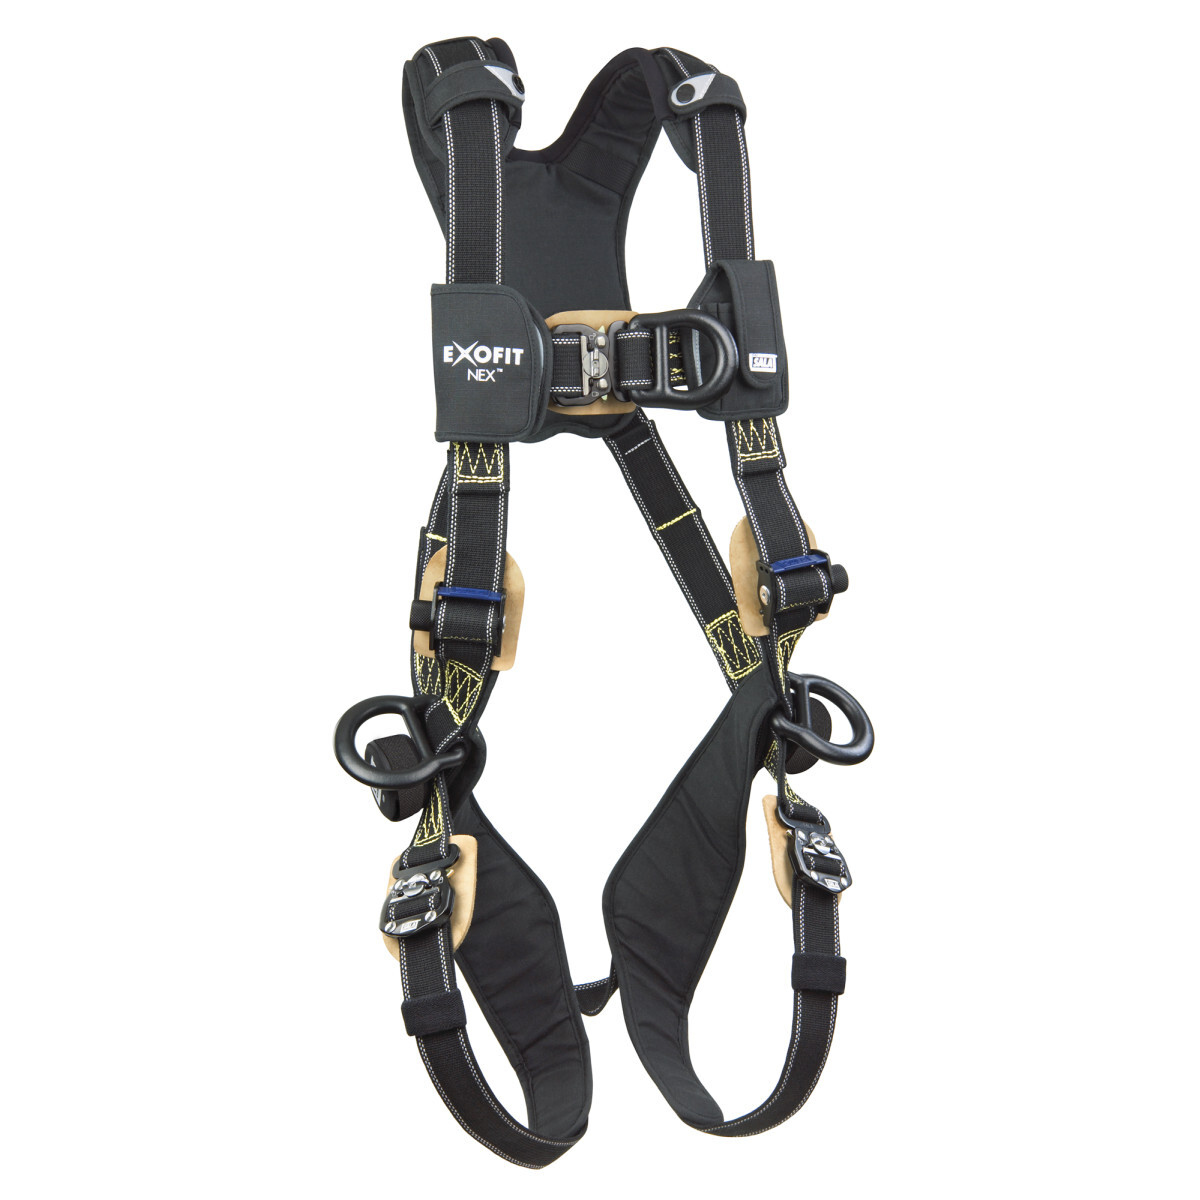 3M™ DBI-SALA® Medium ExoFit NEX™ Arc Flash Full Body/Vest Style Harness With Front, Back And Side D-Ring, Locking Quick Connect